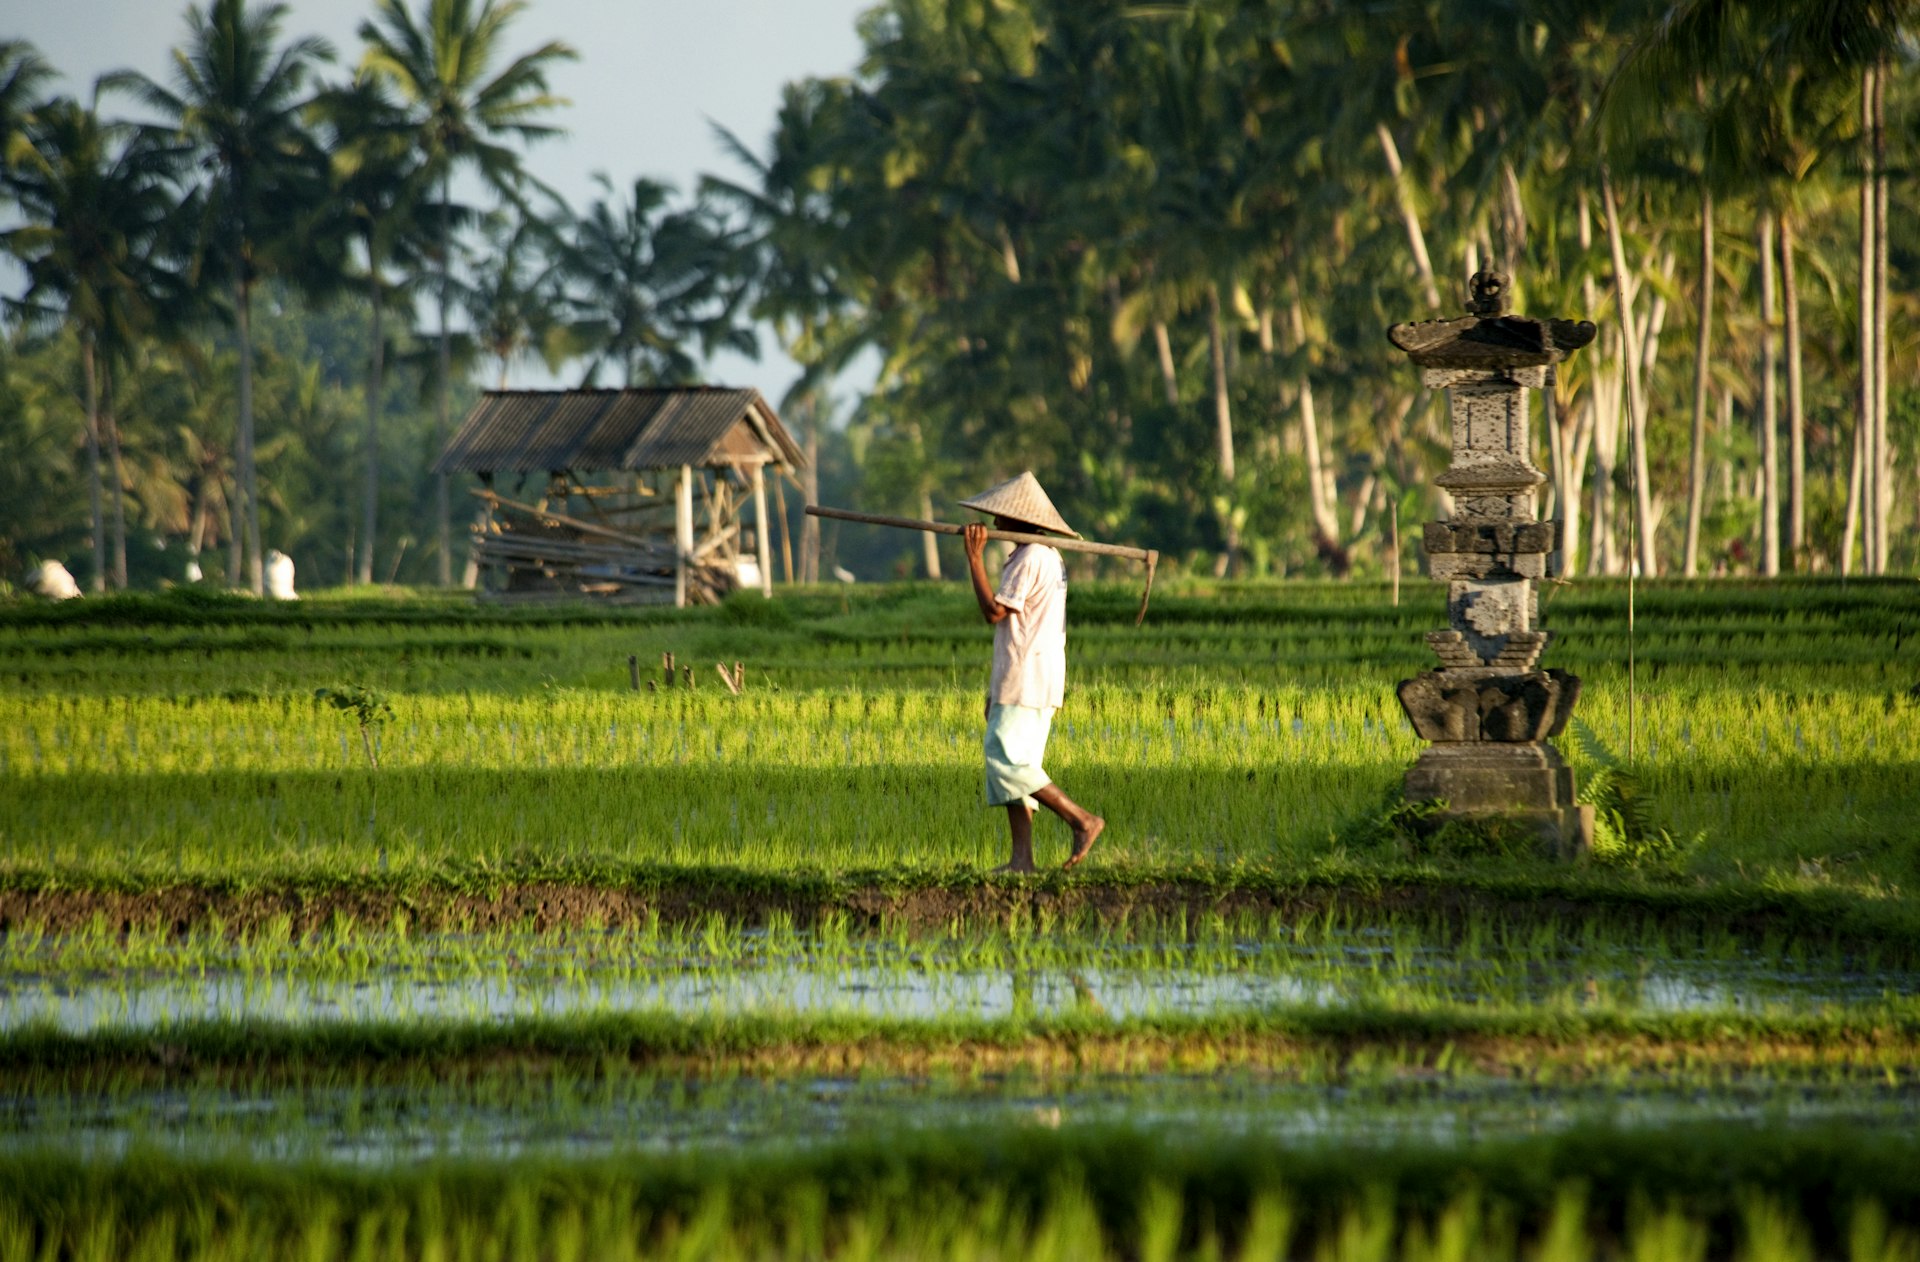 A person, dressed in white and wearing a conical hat, carries a long tool over their shoulder as they walk through a flooded rice field